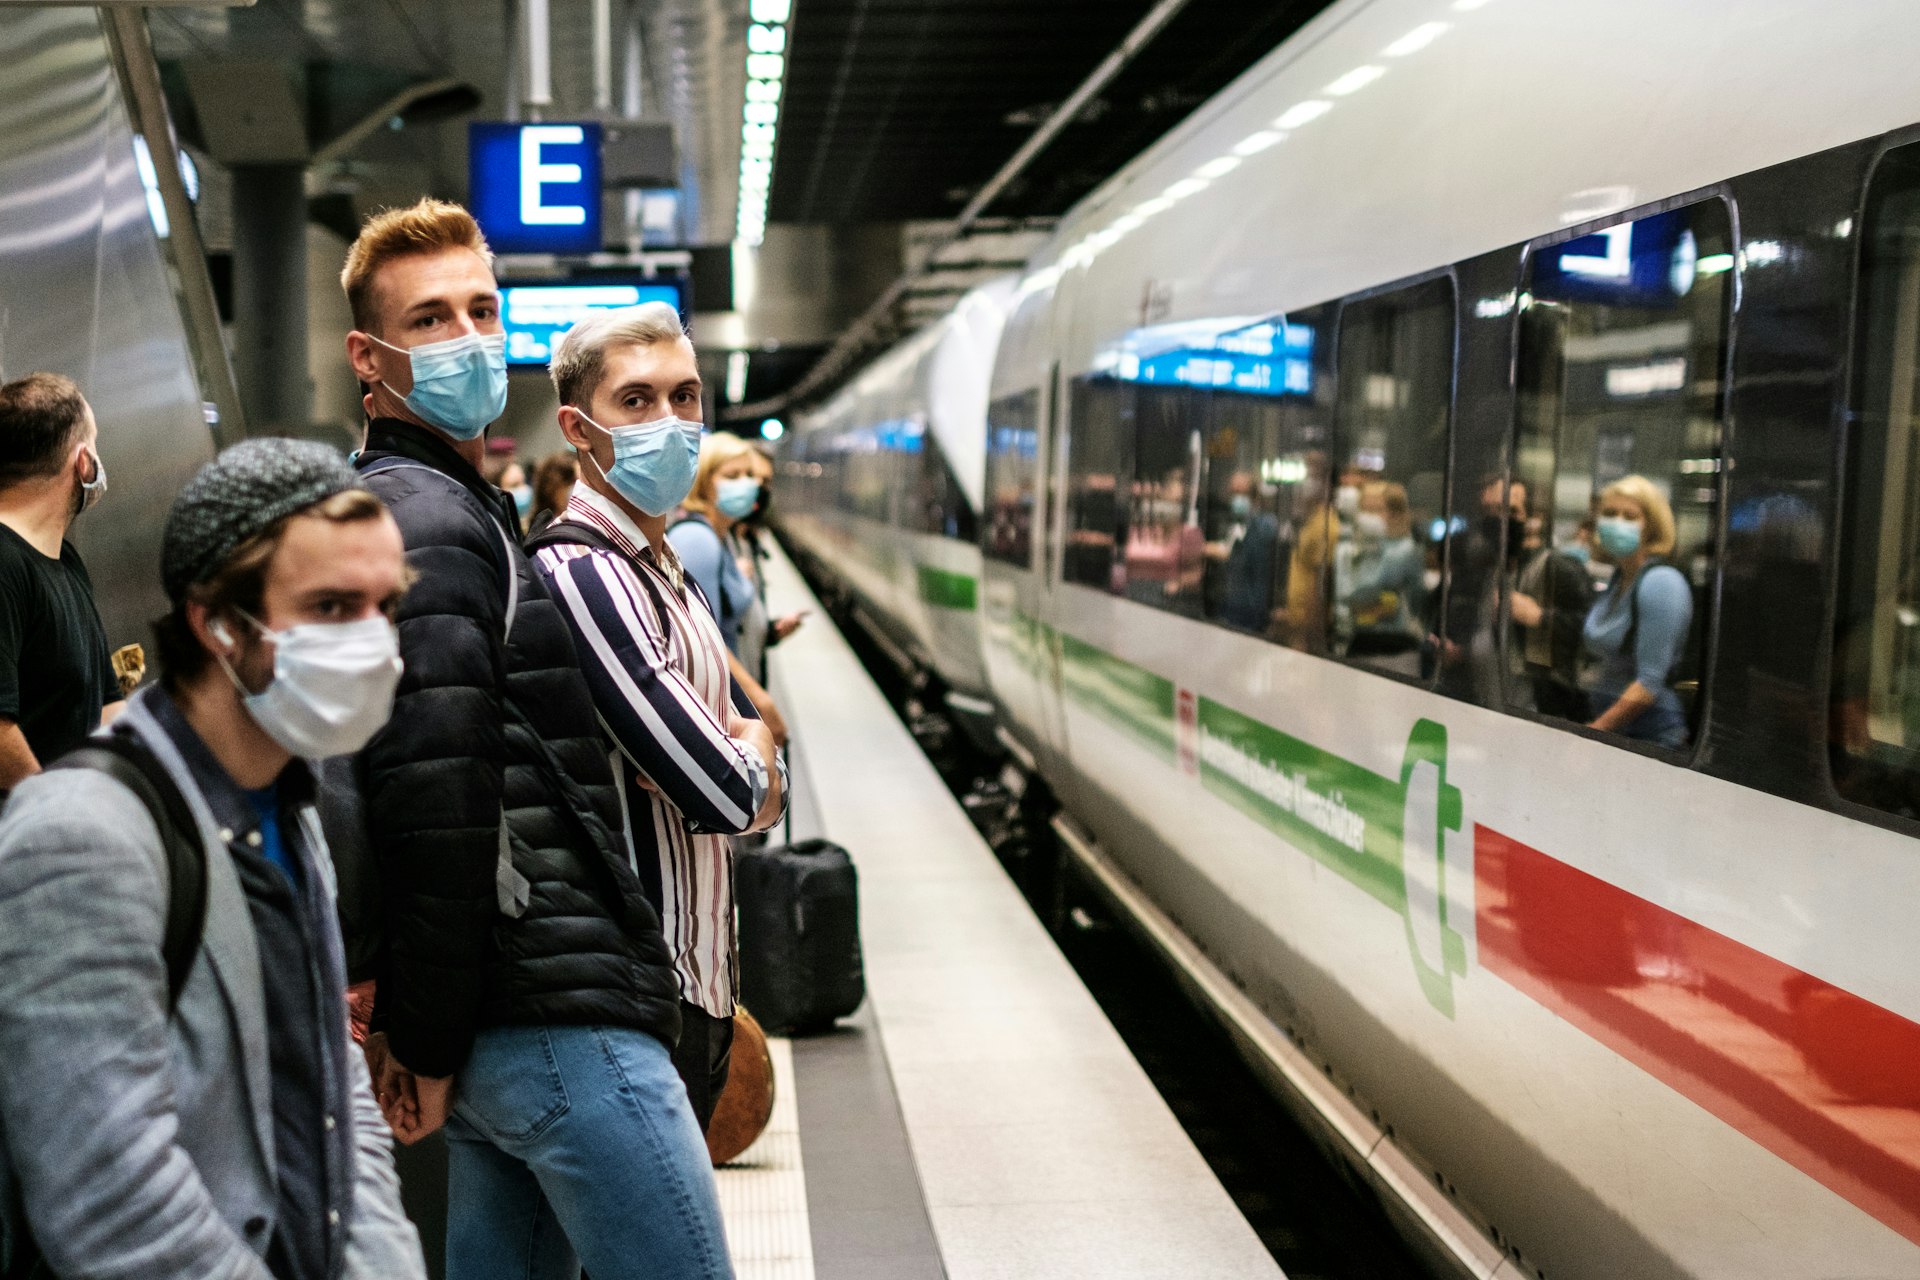 People stand on the platform wearing masks and waiting for a train. 